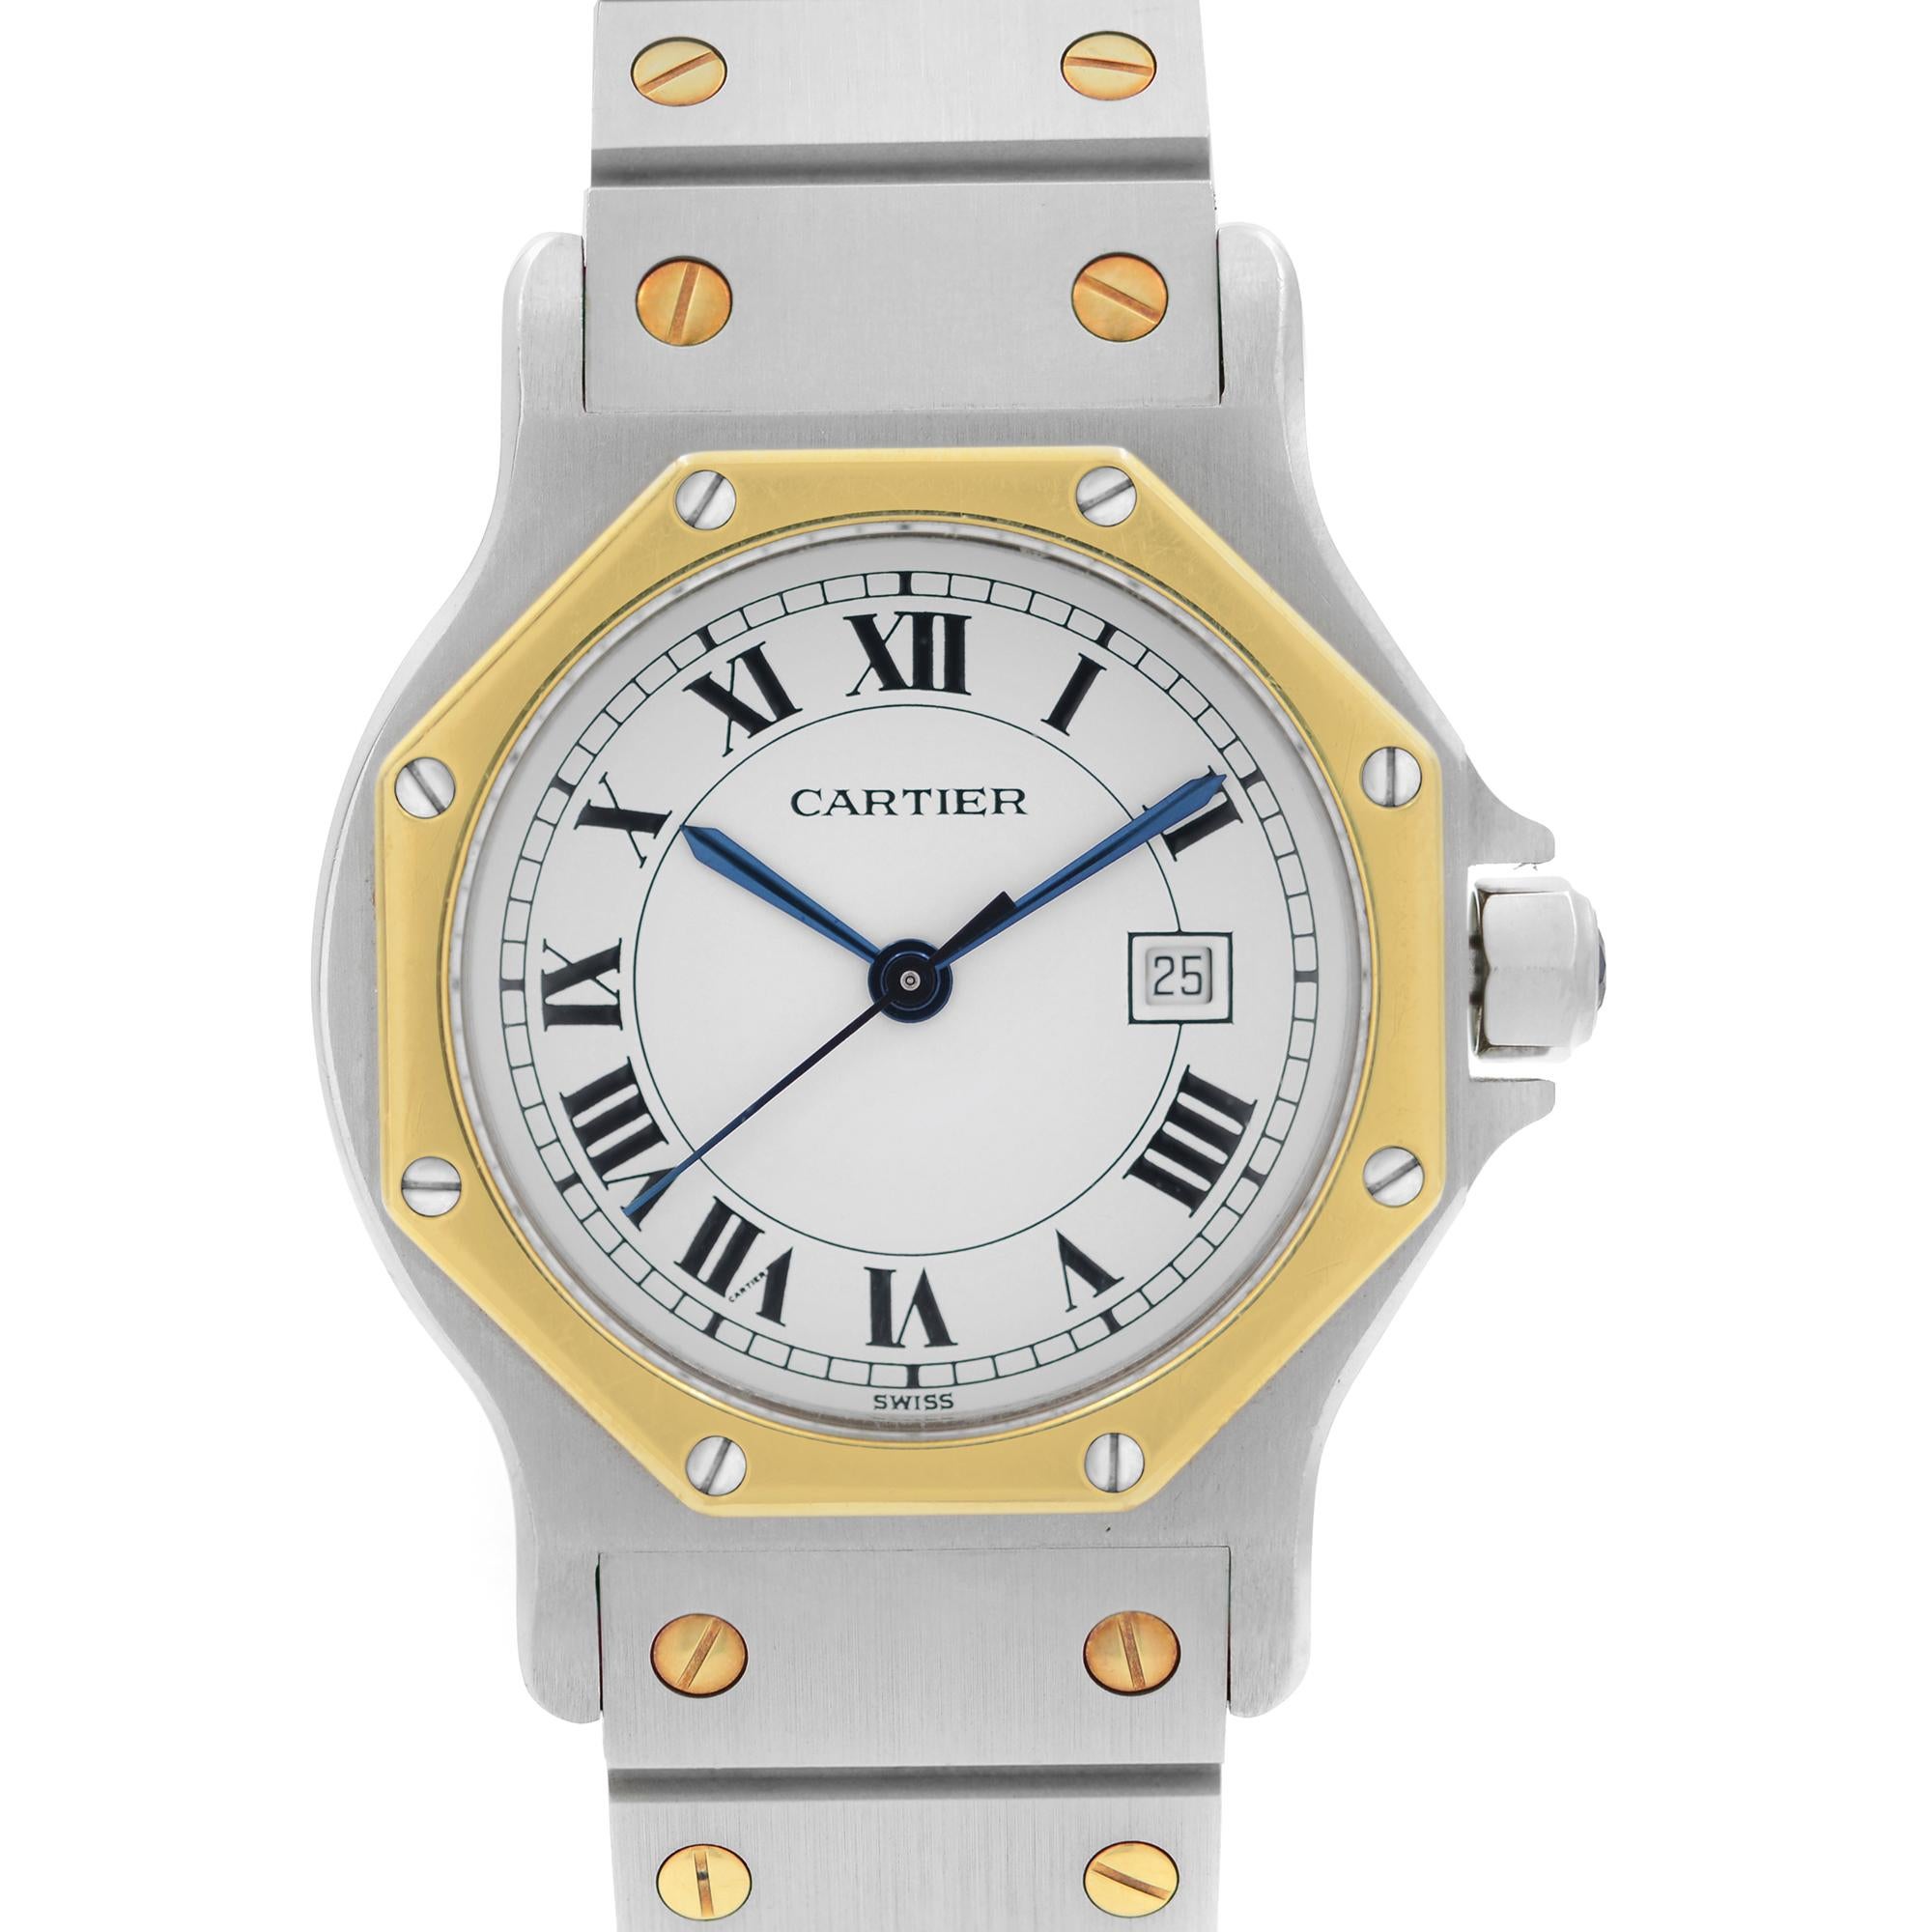 Pre Owned Cartier Santos Octagon Steel Gold White Dial Automatic Ladies Watch 2966. This Beautiful Timepiece Features: Stainless Steel Case with a Stainless Steel Bracelet, Two Gold Screws on each Link, Fixed Gold Octagon Shaped Bezel with 8 Small